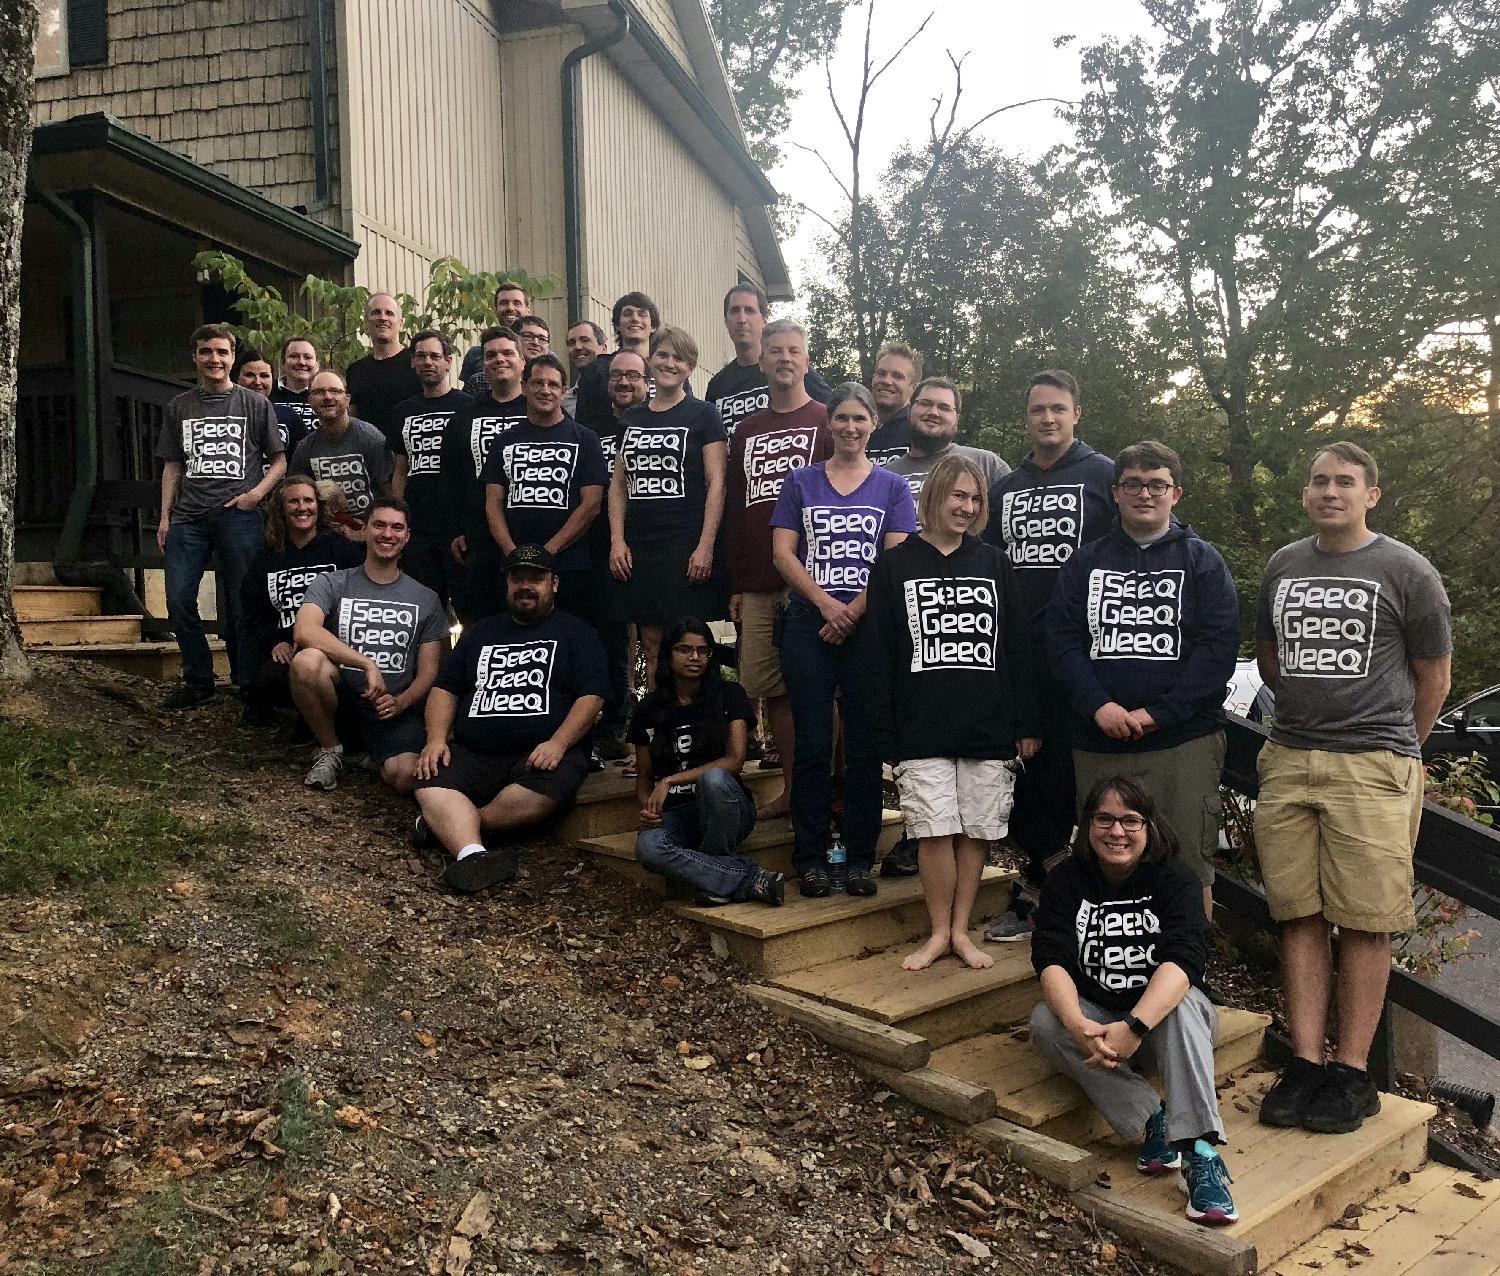 The Seeq software team gathered for a week of intensive time together in Pigeon Forge, TN (home of Dollywood!) in 2018.